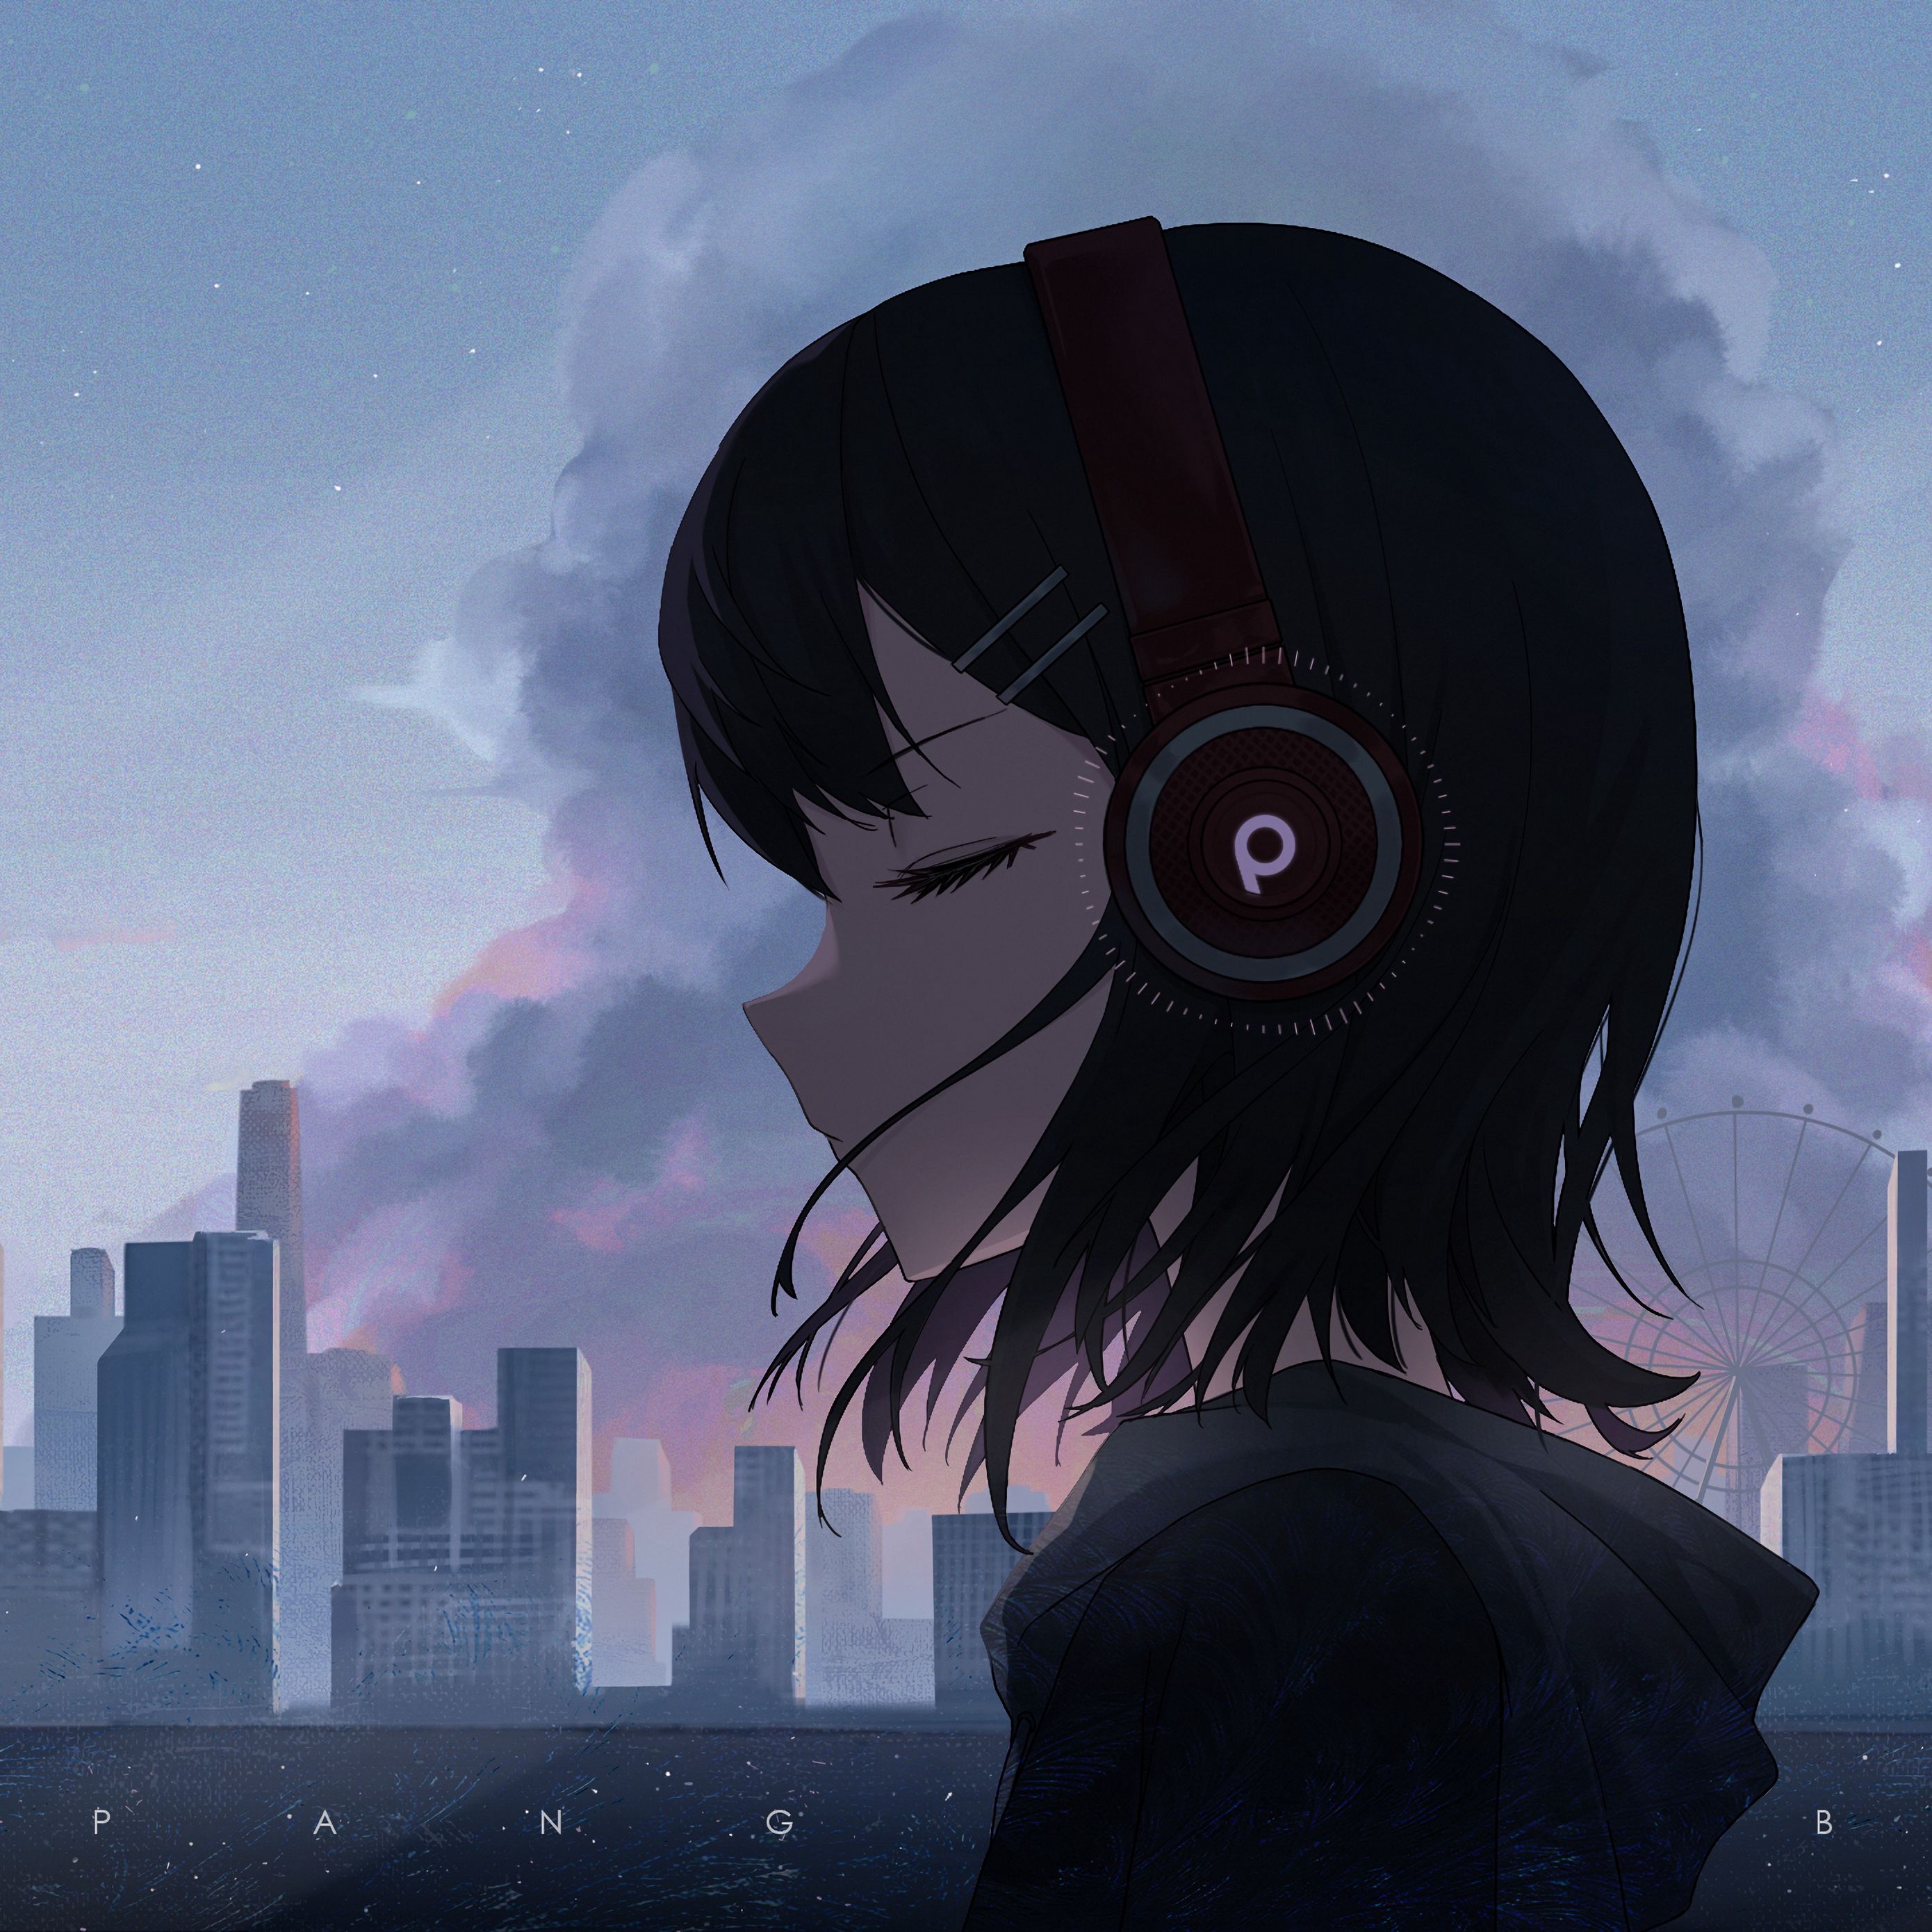 sticky-rail868: Anime girl DJ Listening to Music with book